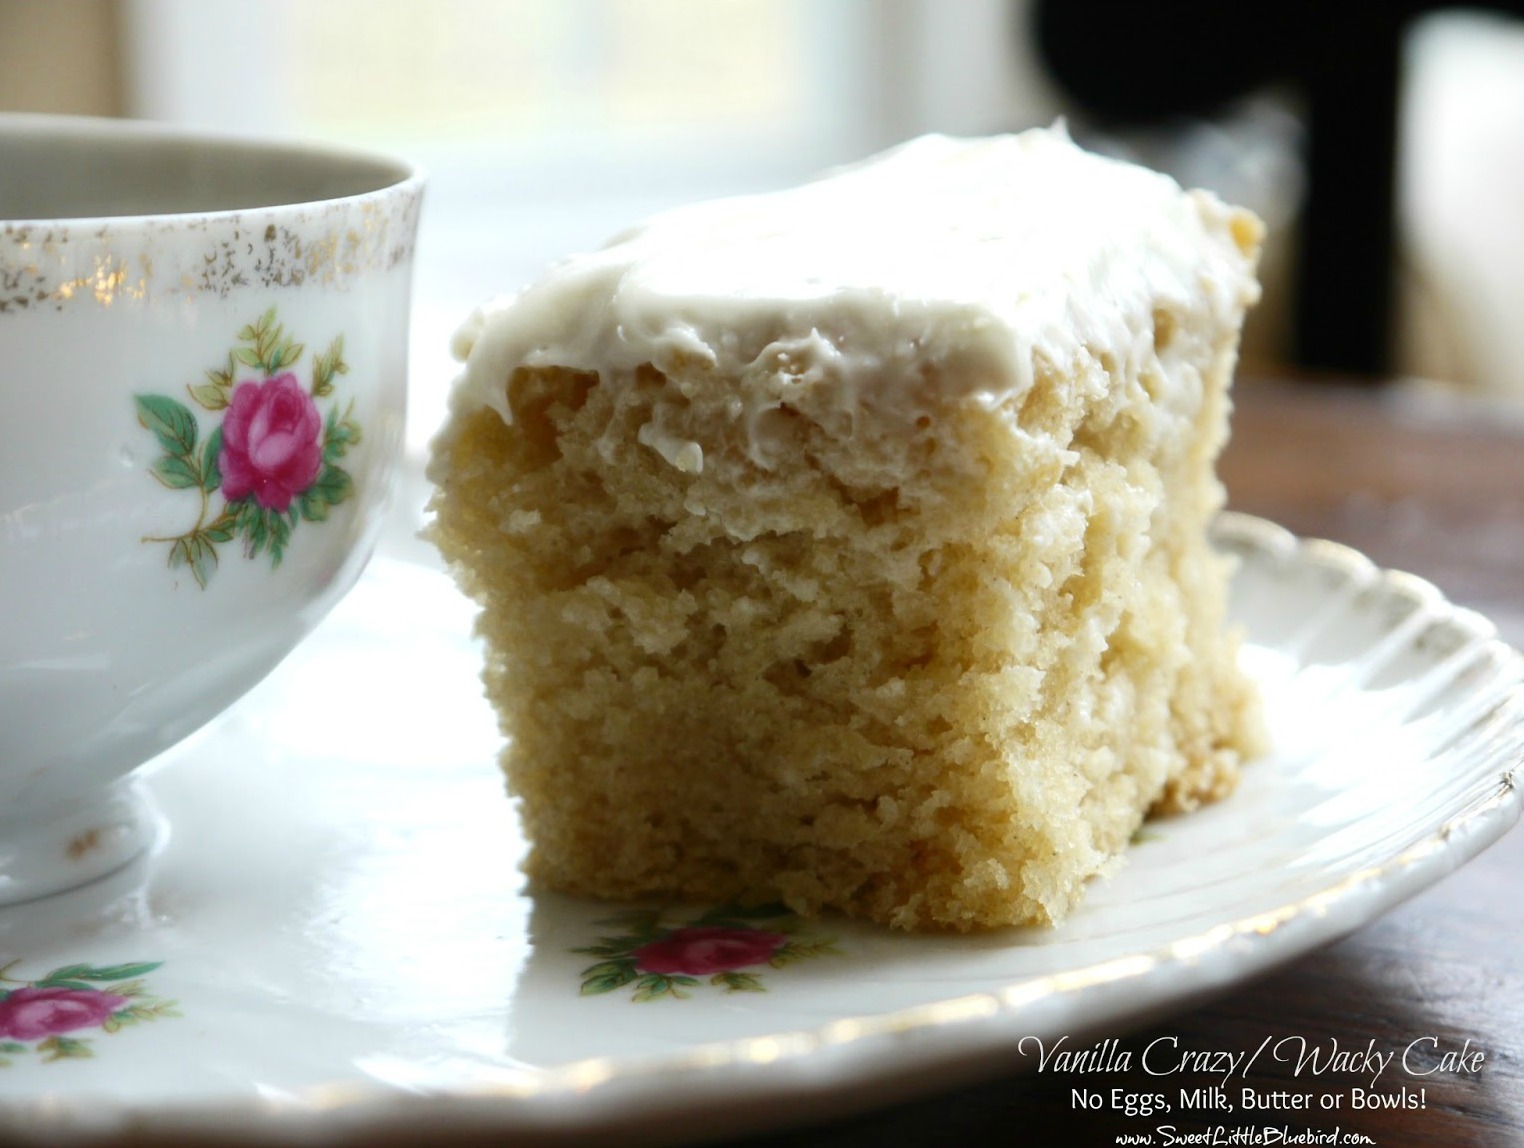 This is a photo of a piece of Vanilla Crazy Cake on a plate next to a tea cup.